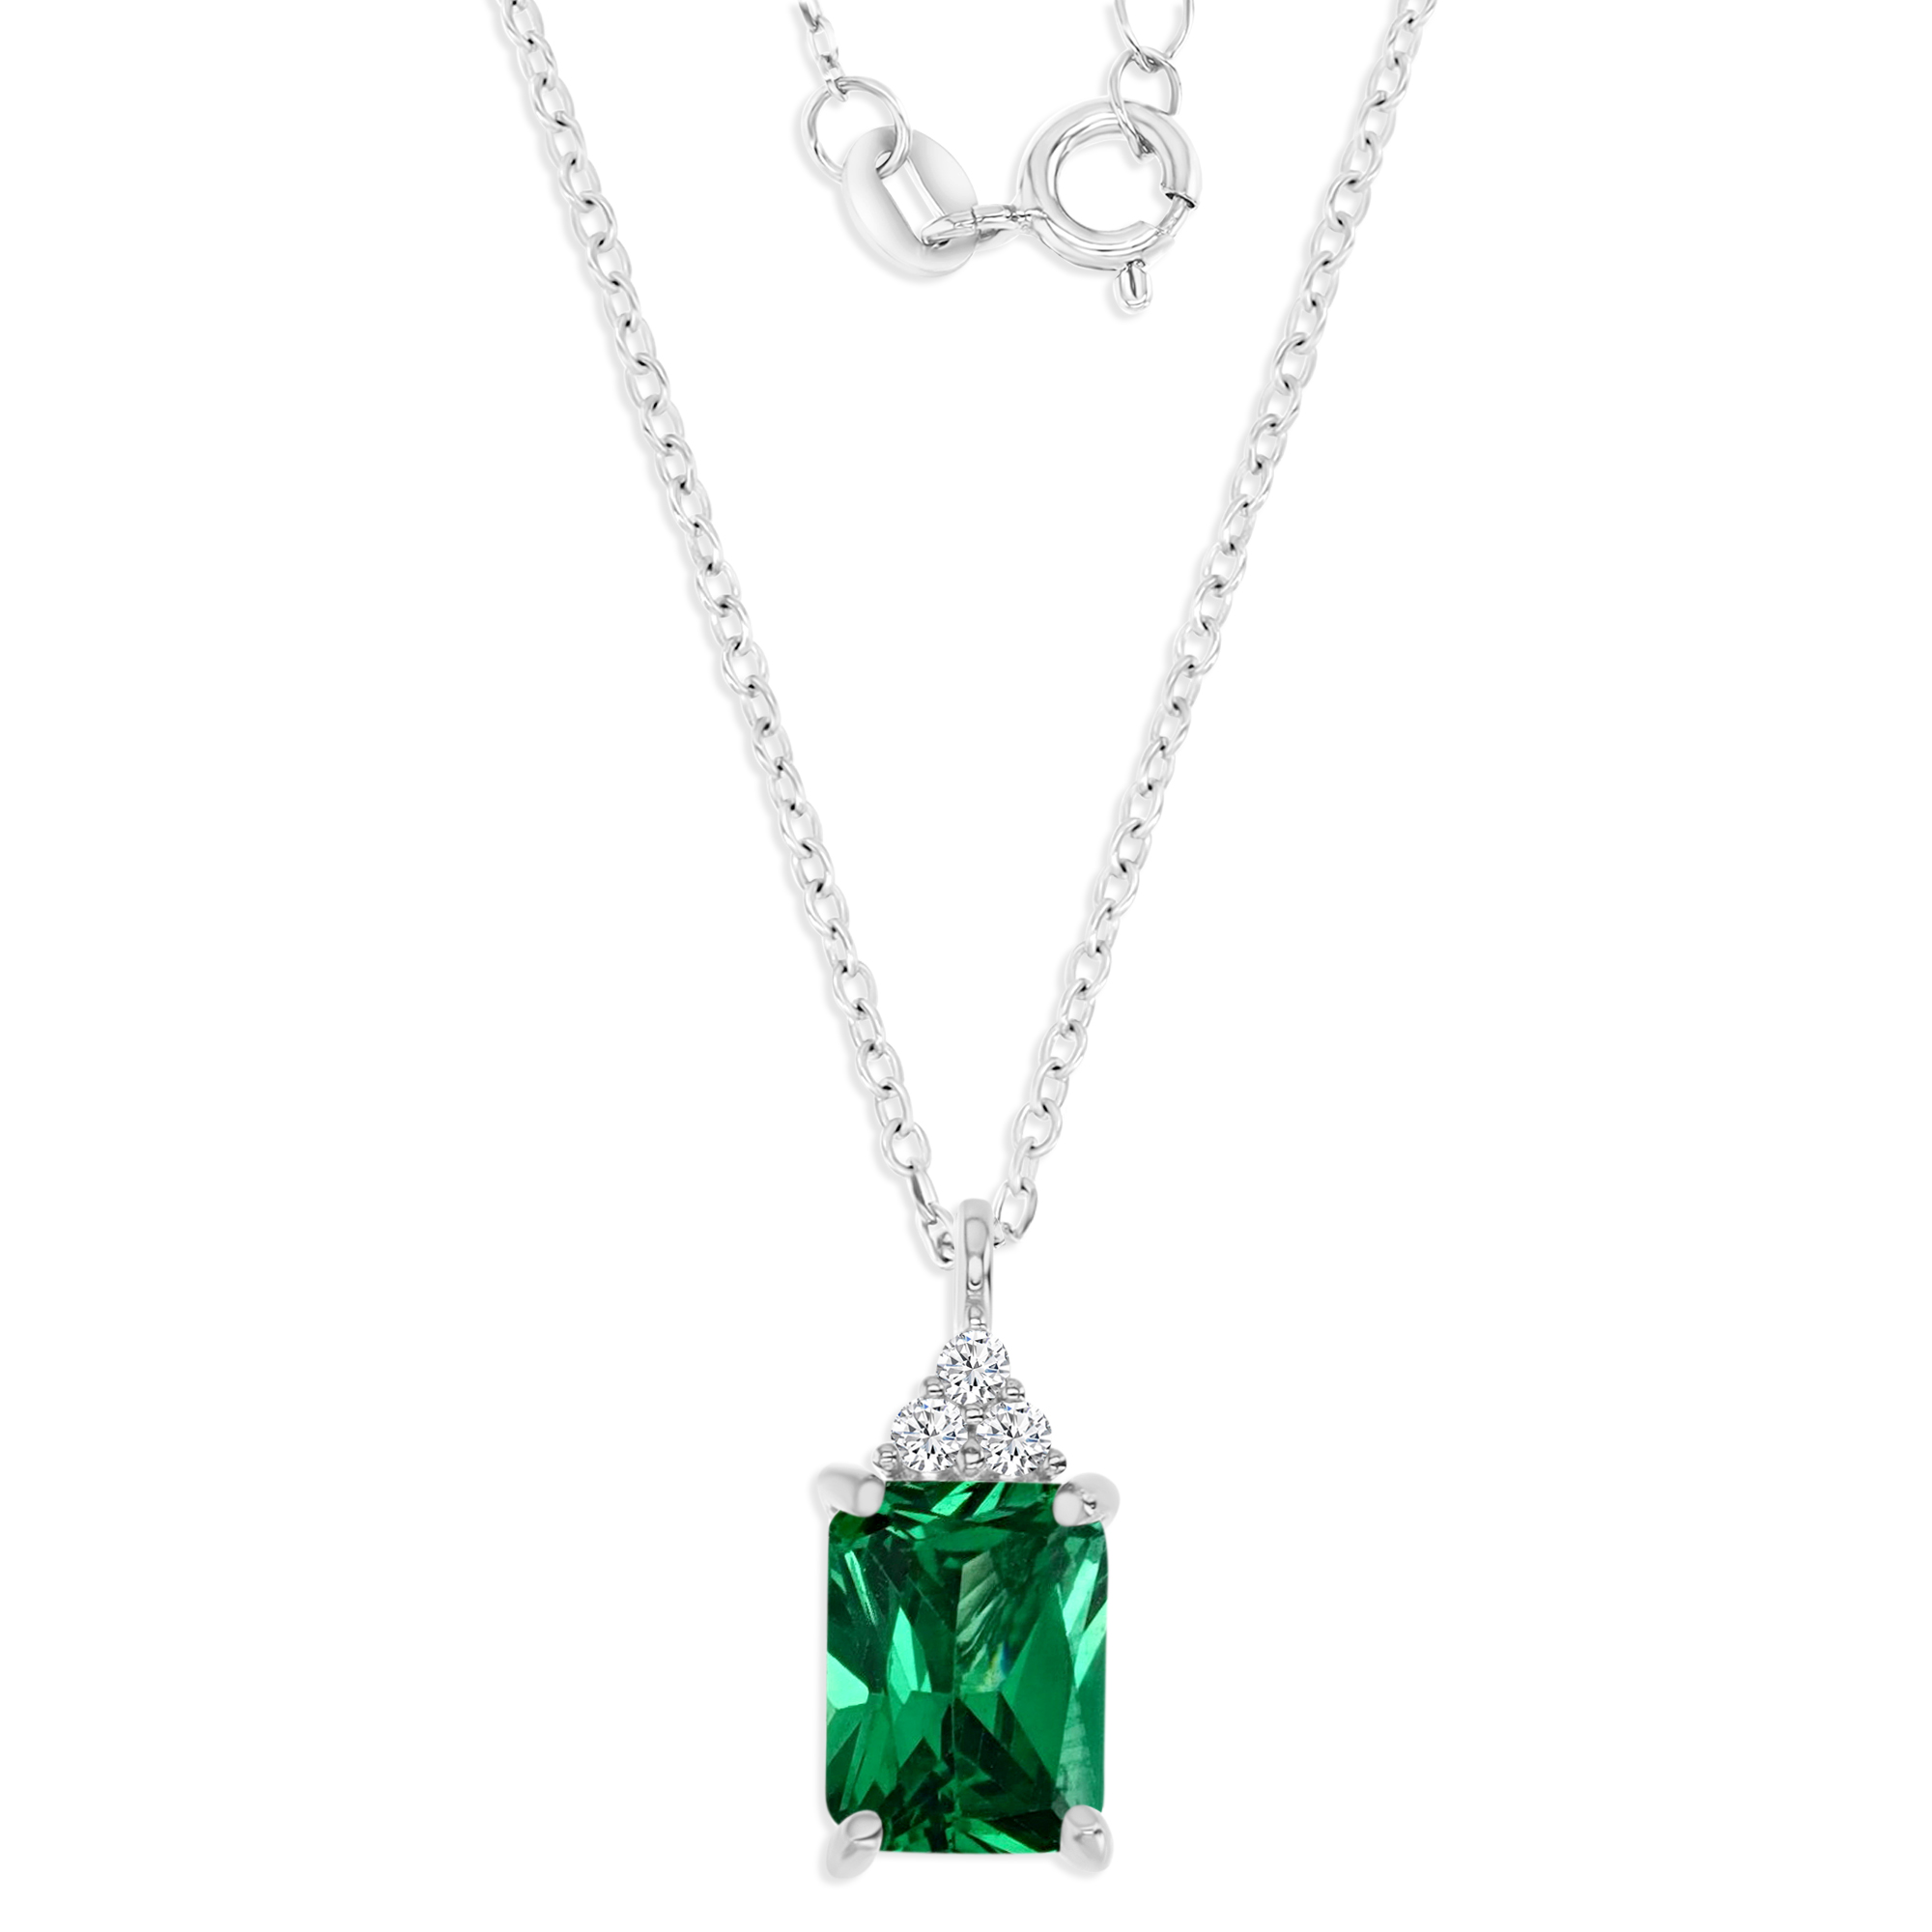 Sterling Silver Rhodium 8X6MM Polished Green & White CZ Emerald Cut Dangling 18''Necklace